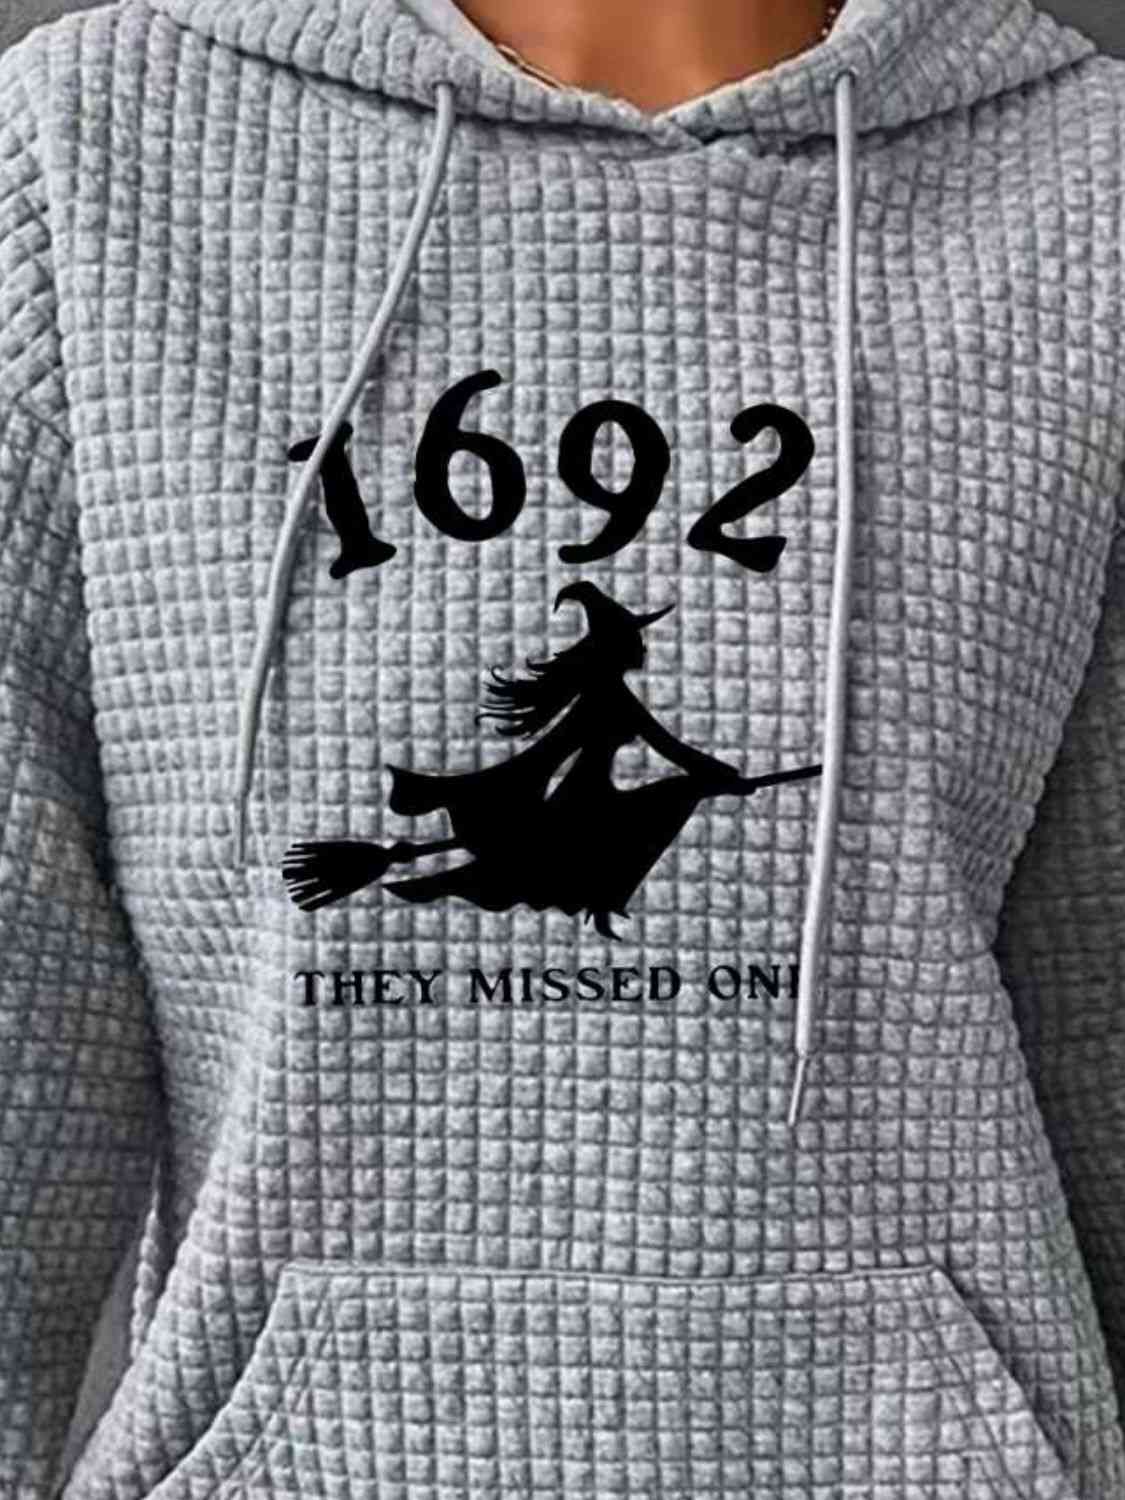 1962 THEY MISSED ONE Graphic Hoodie with Front Pocket